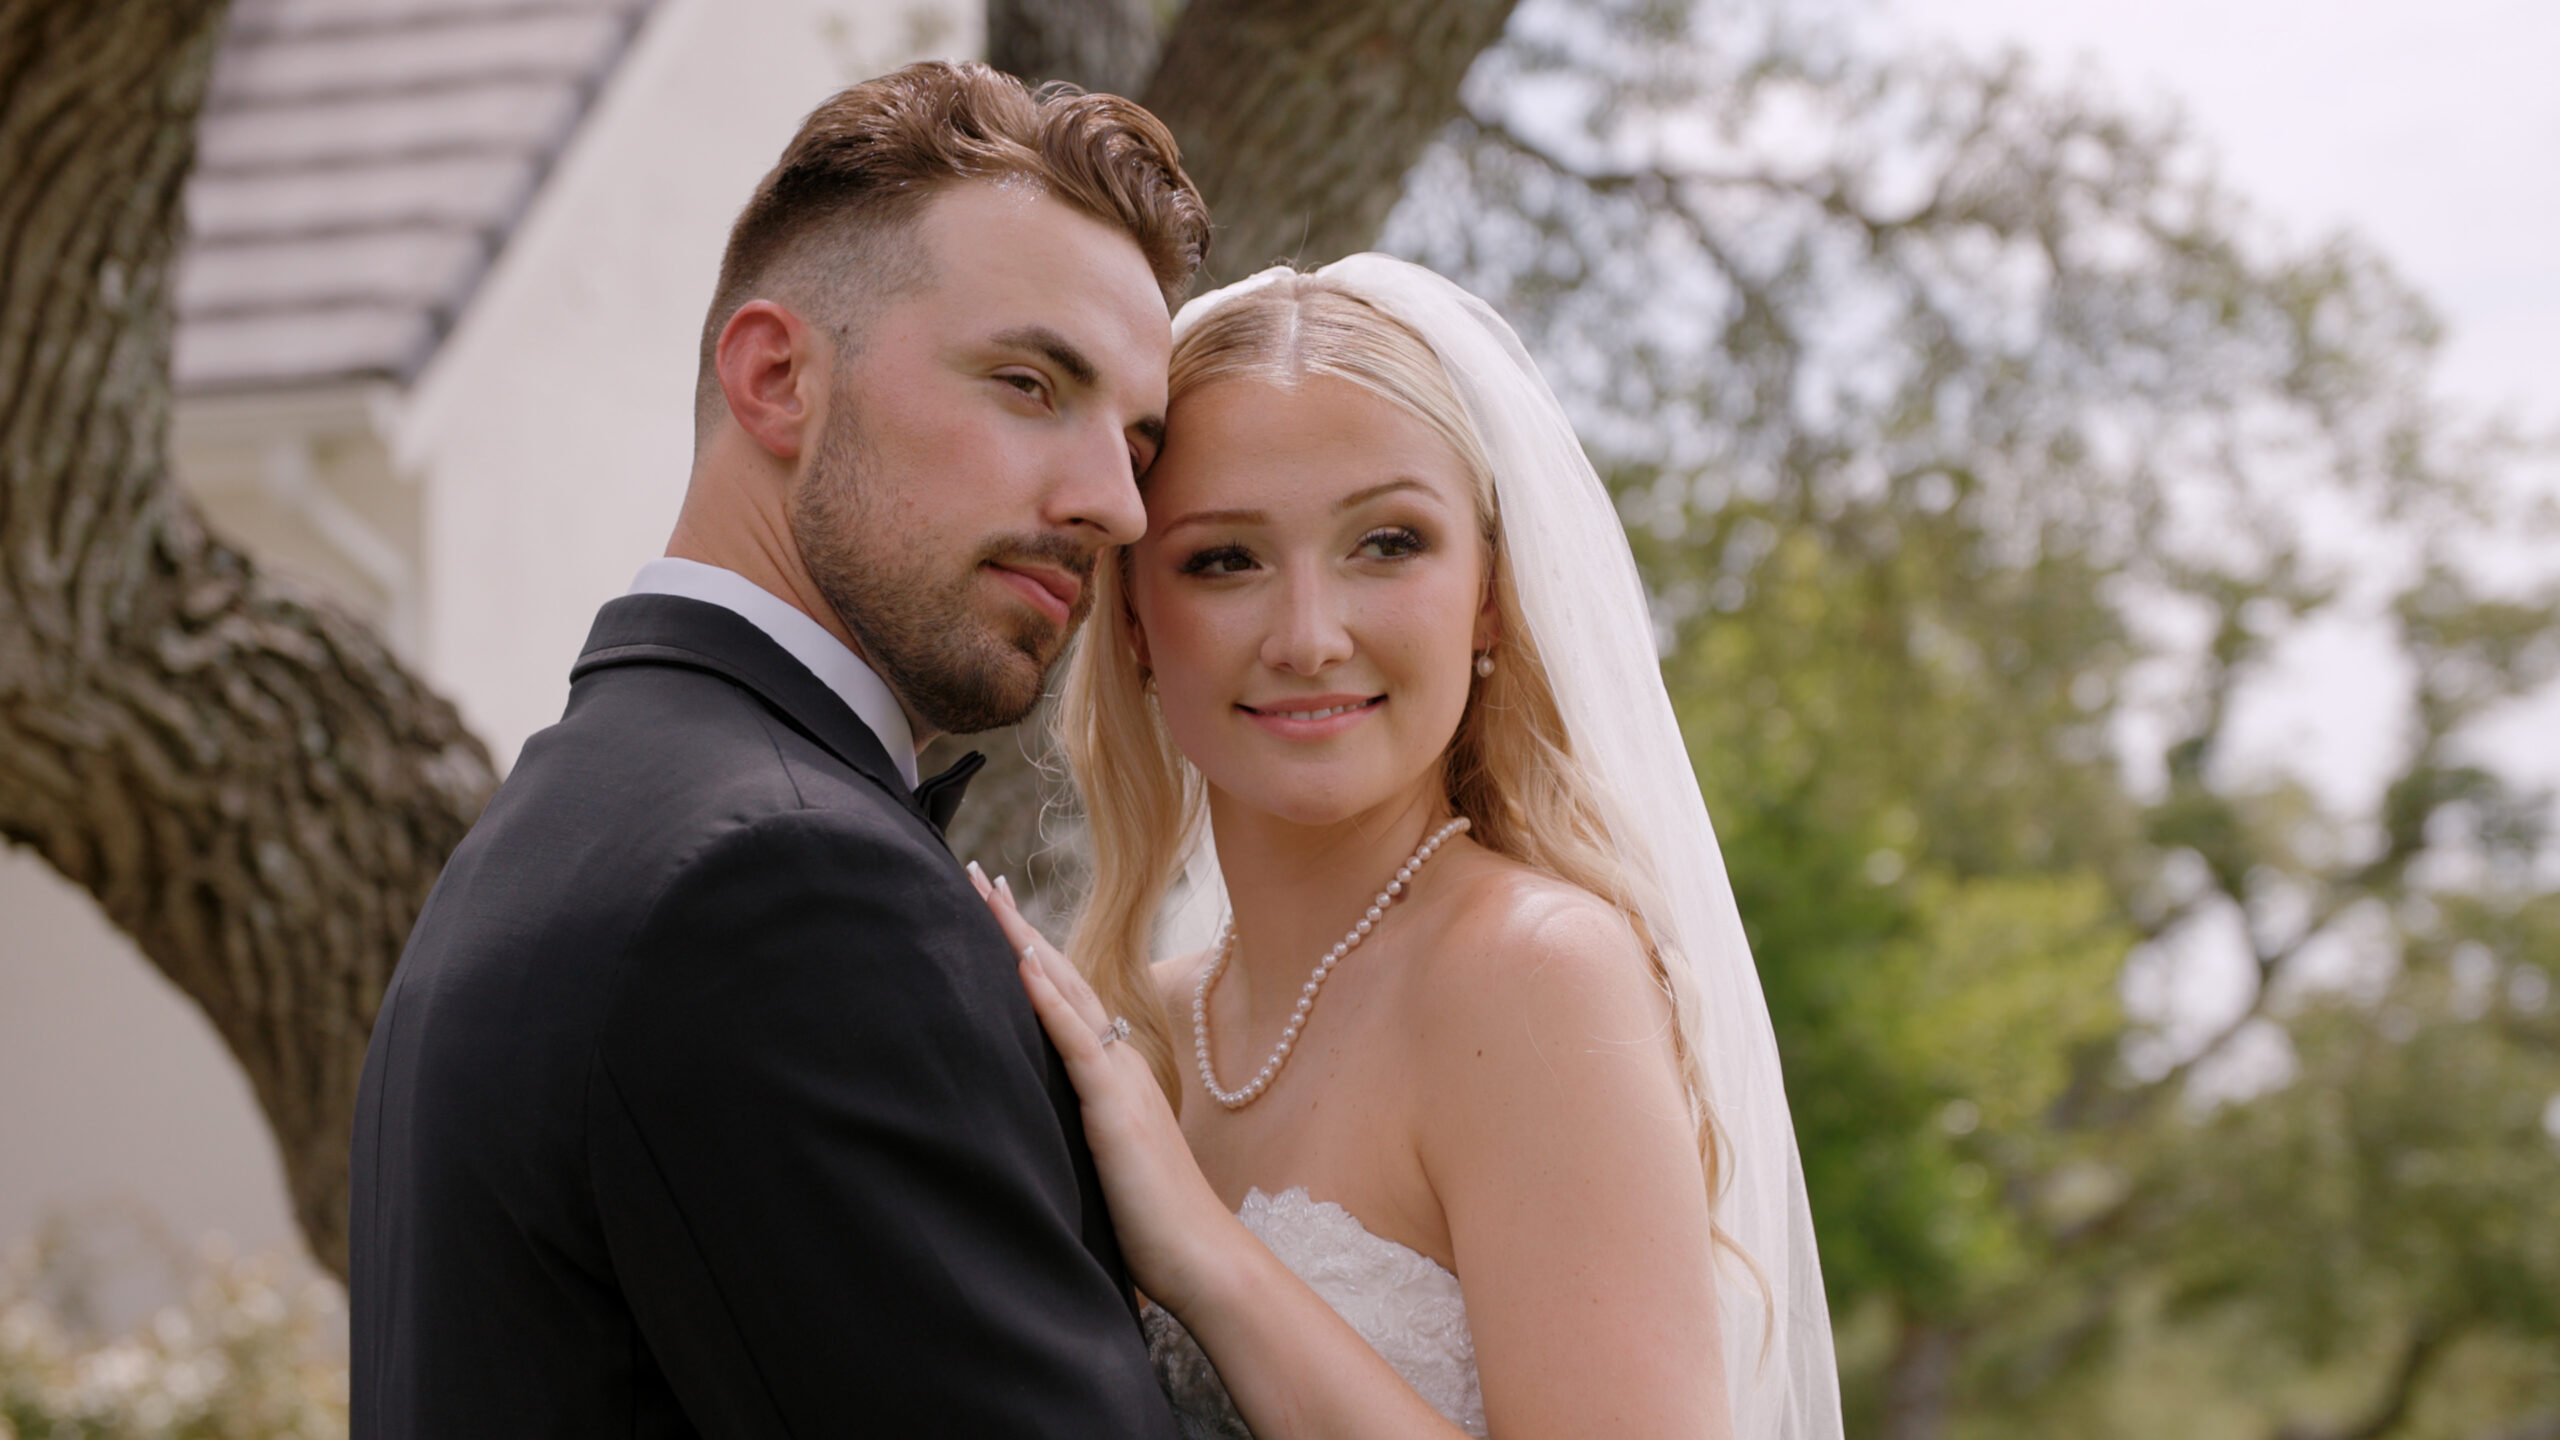 Brittany and Jacob wedding film at The Arlo in Austin, Texas